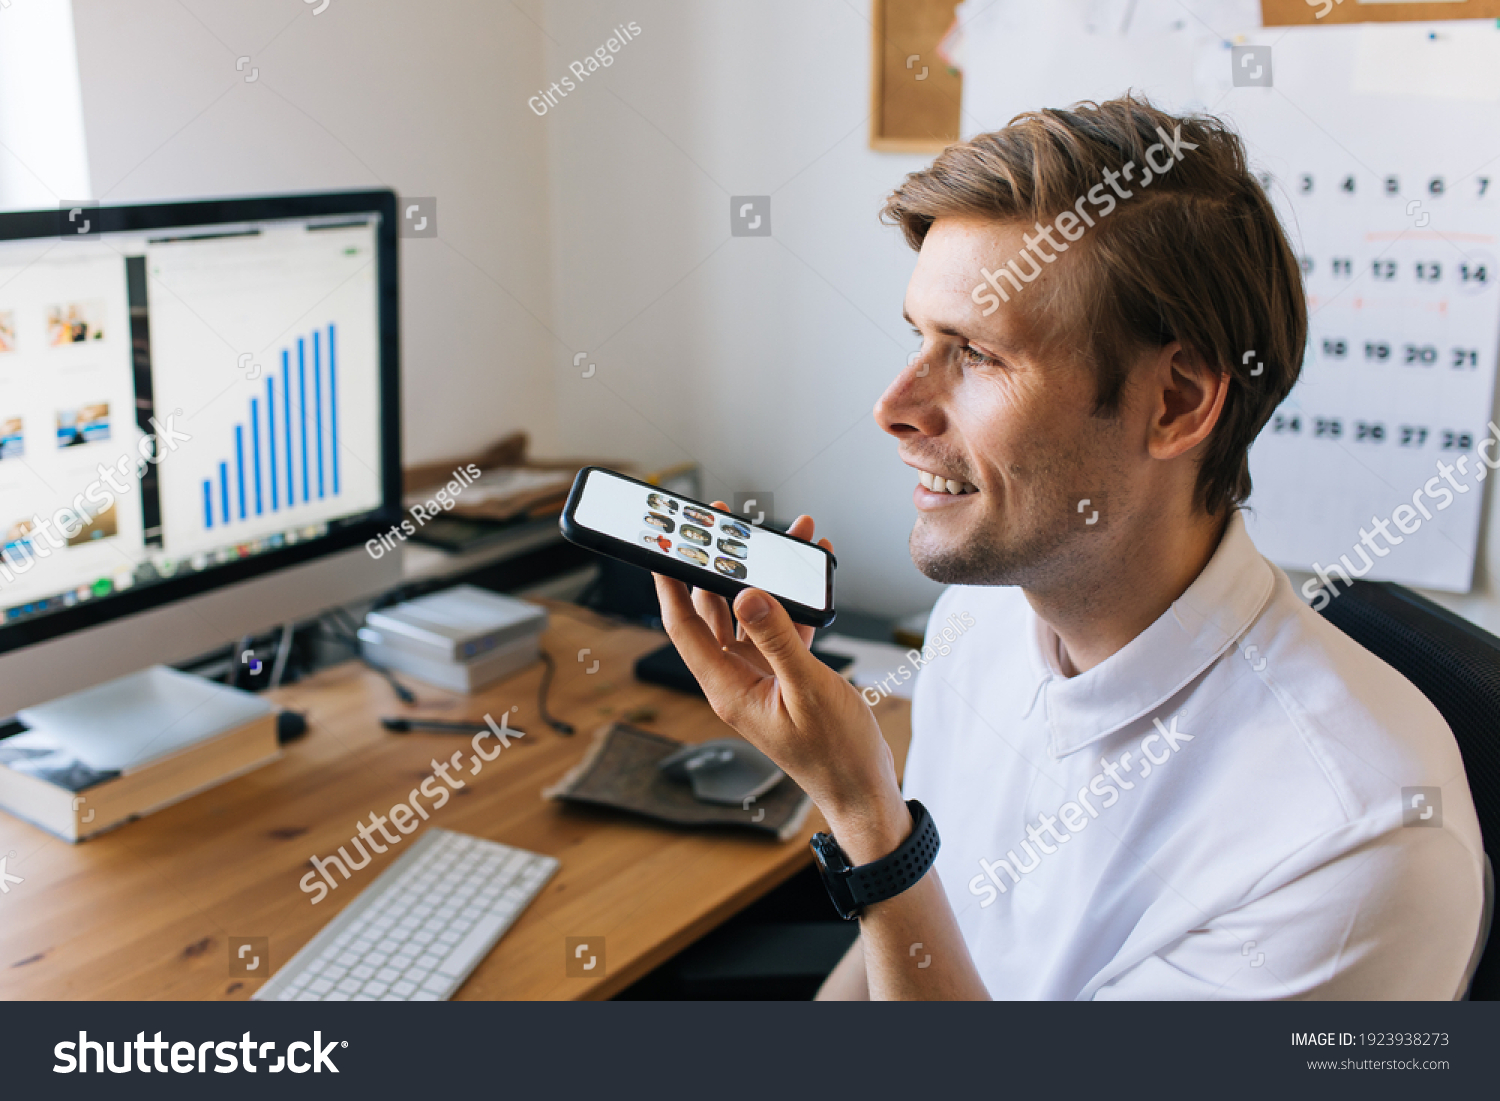 Man using mobile phone. Social media use at work. Work from home Clubhouse the voice-only social media app. Smiling male talking on the phone social platform built around drop-in audio chat #1923938273